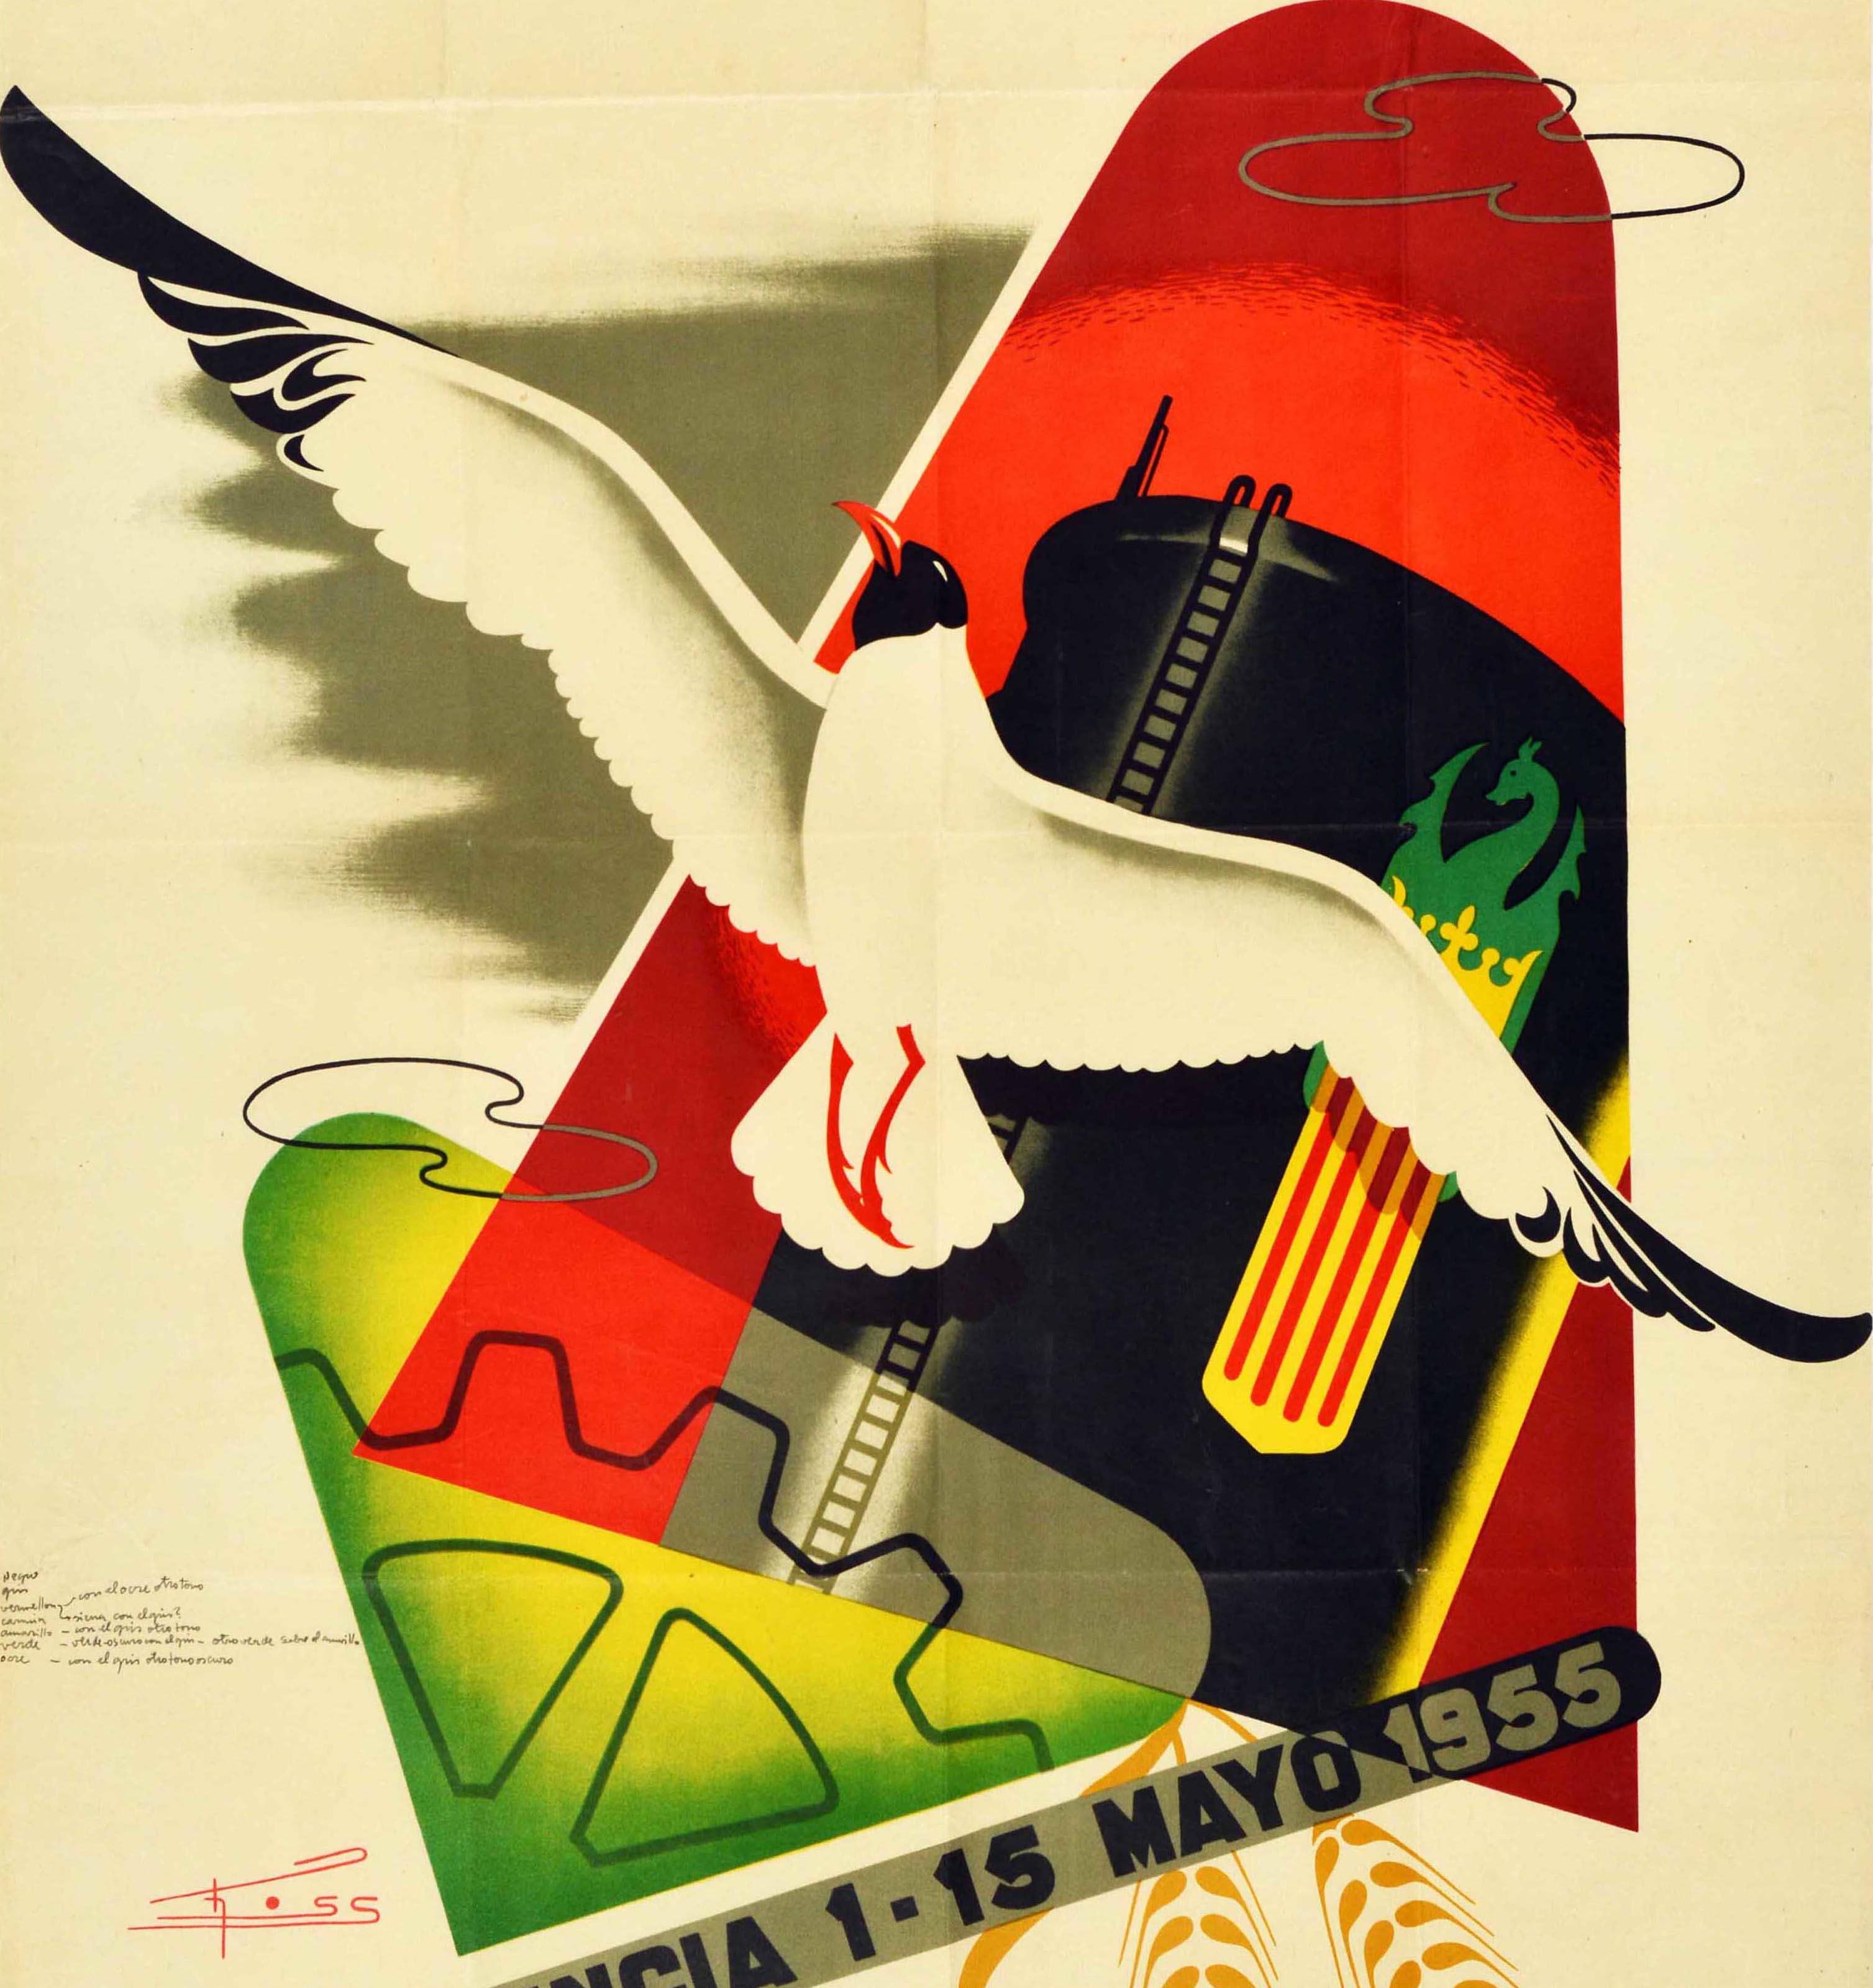 Original vintage advertising poster for the XXXIII Feria Muestrario Internacional / International Trade Fair held in Valencia from 1-15 May 1955 featuring an elegant bird flying with its wings outstretched in front of an image of an industrial gear